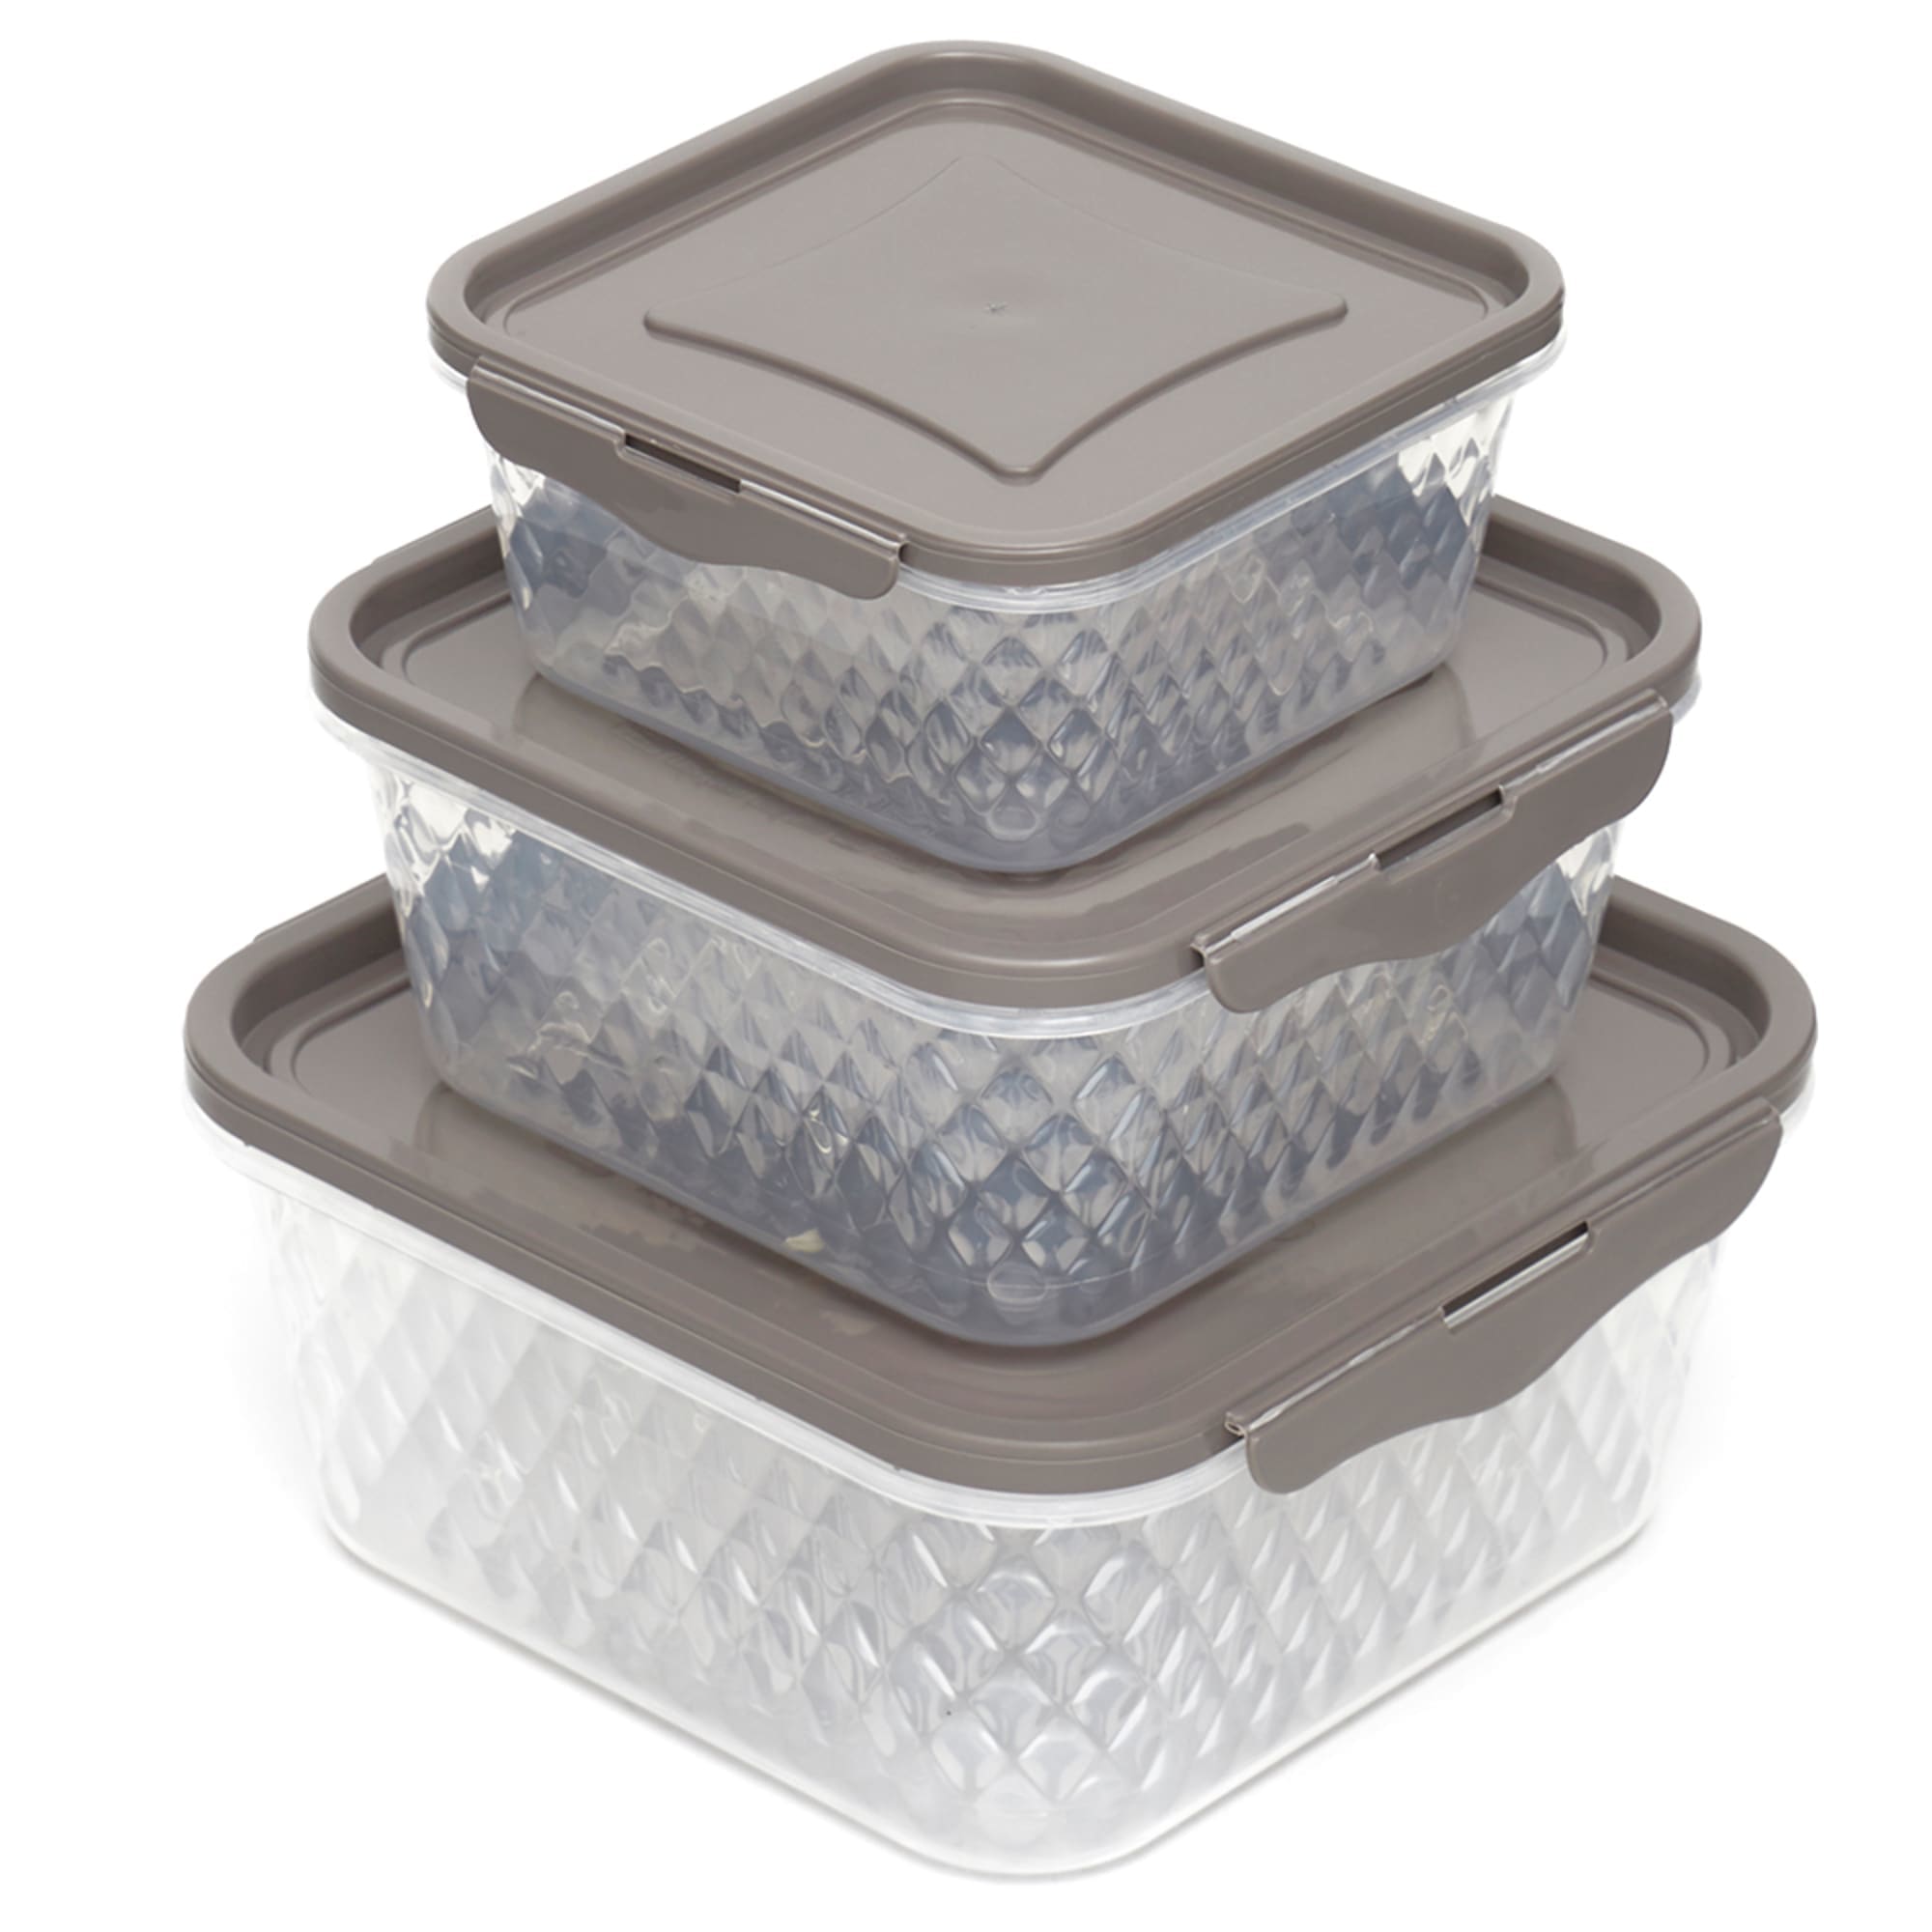 Home Basics Crystal 3 Piece Square Food Storage Containers with Locking Lids, 18.59 oz, 33.81 oz, 57.48 oz $4 EACH, CASE PACK OF 12